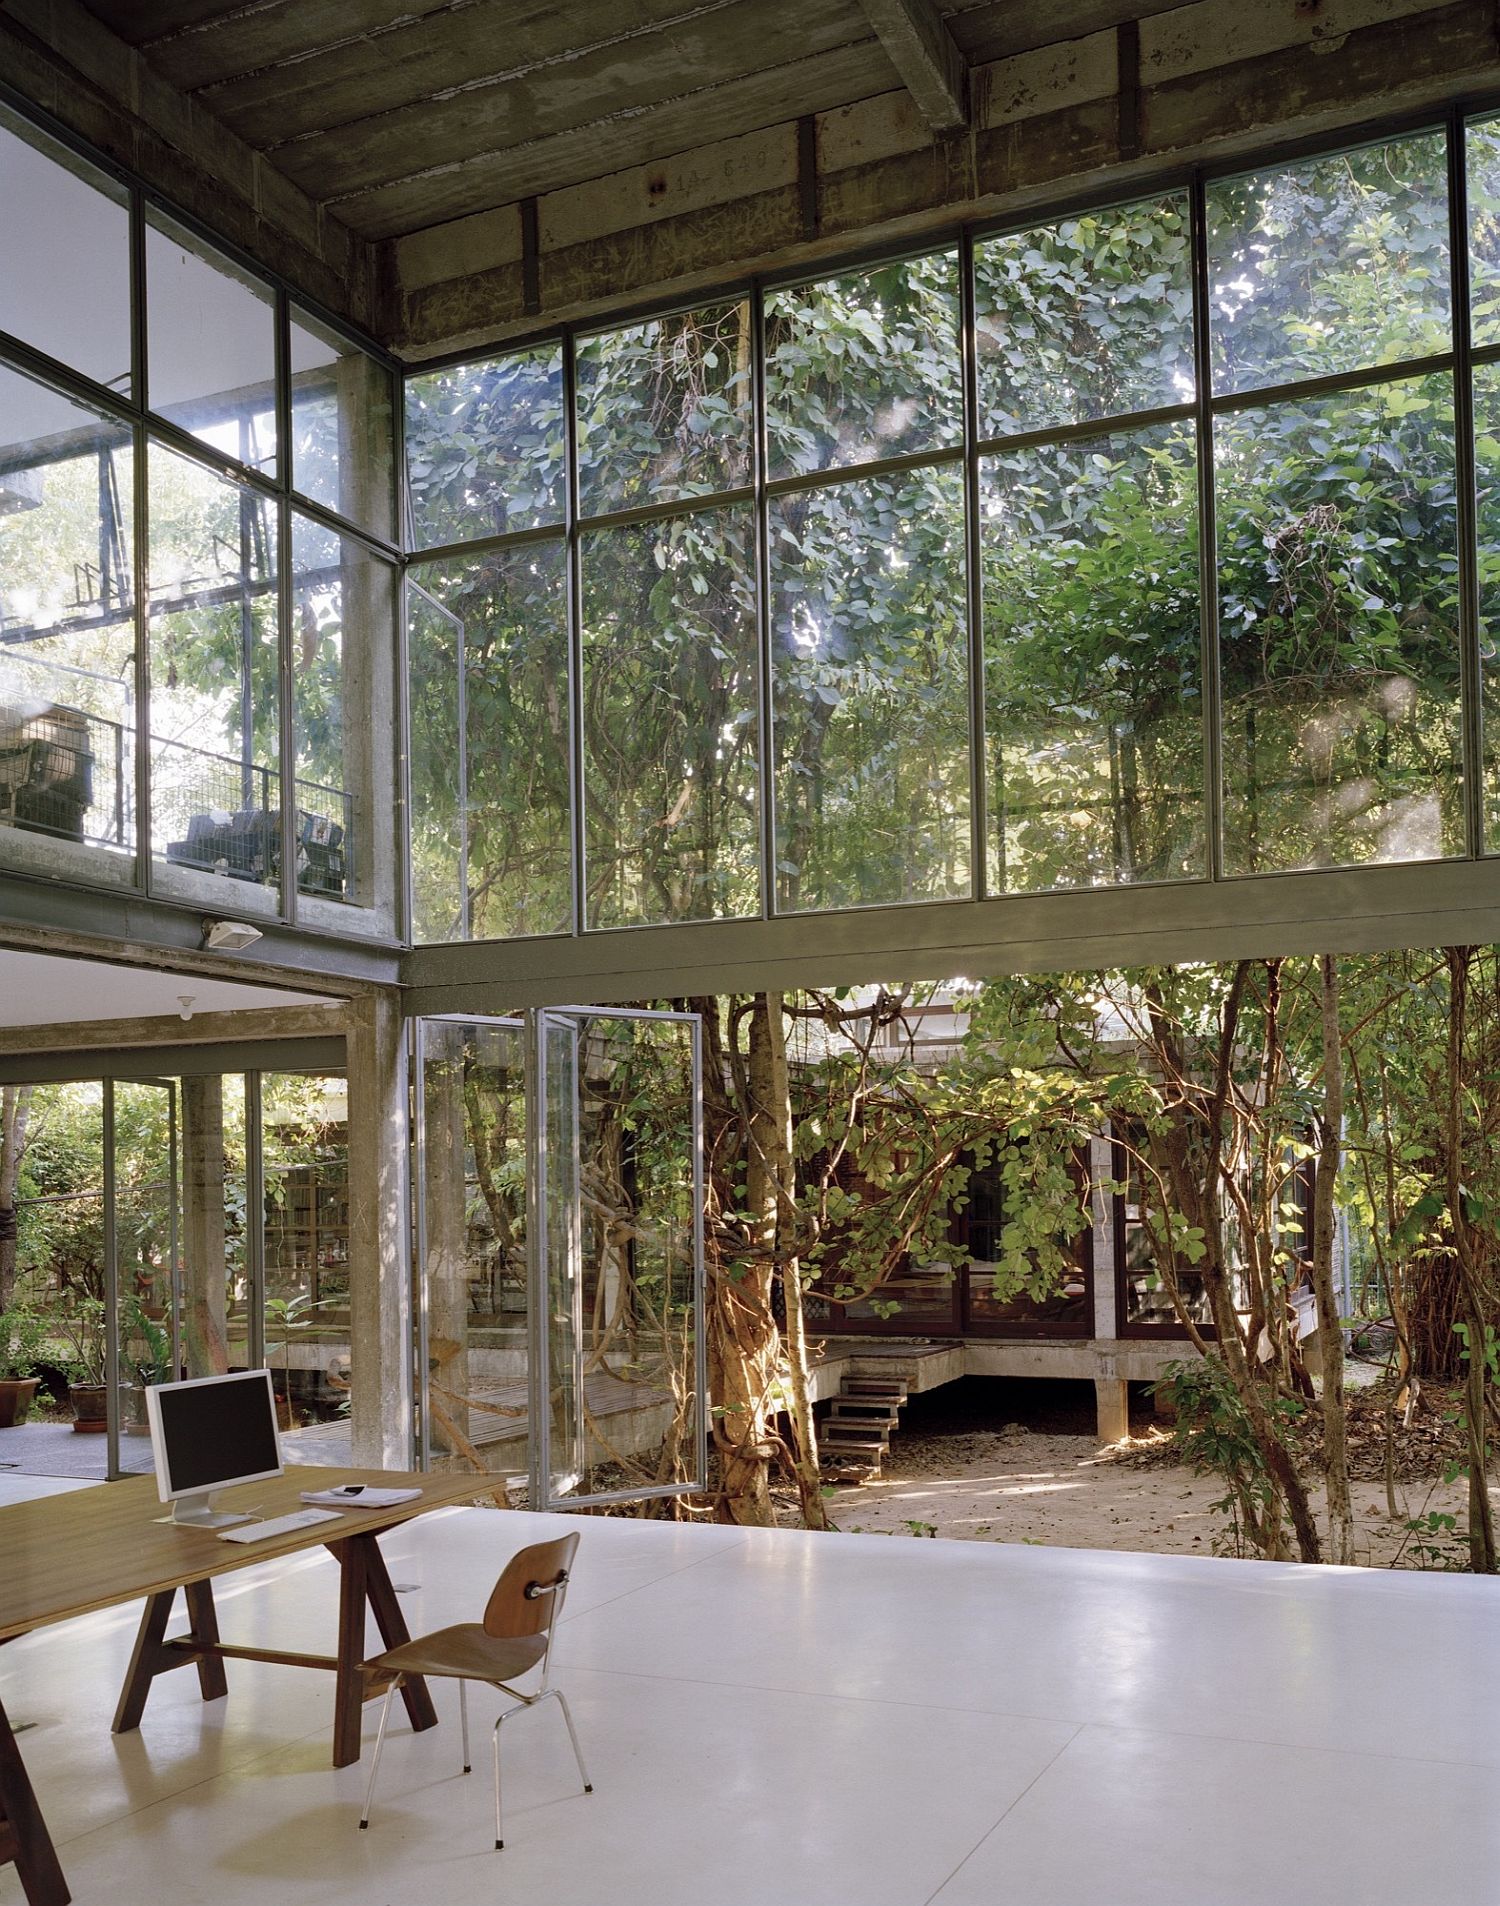 Studio-and-kids-play-area-of-the-home-in-Thailand-with-double-height-ceiling-and-sweeping-glass-windows